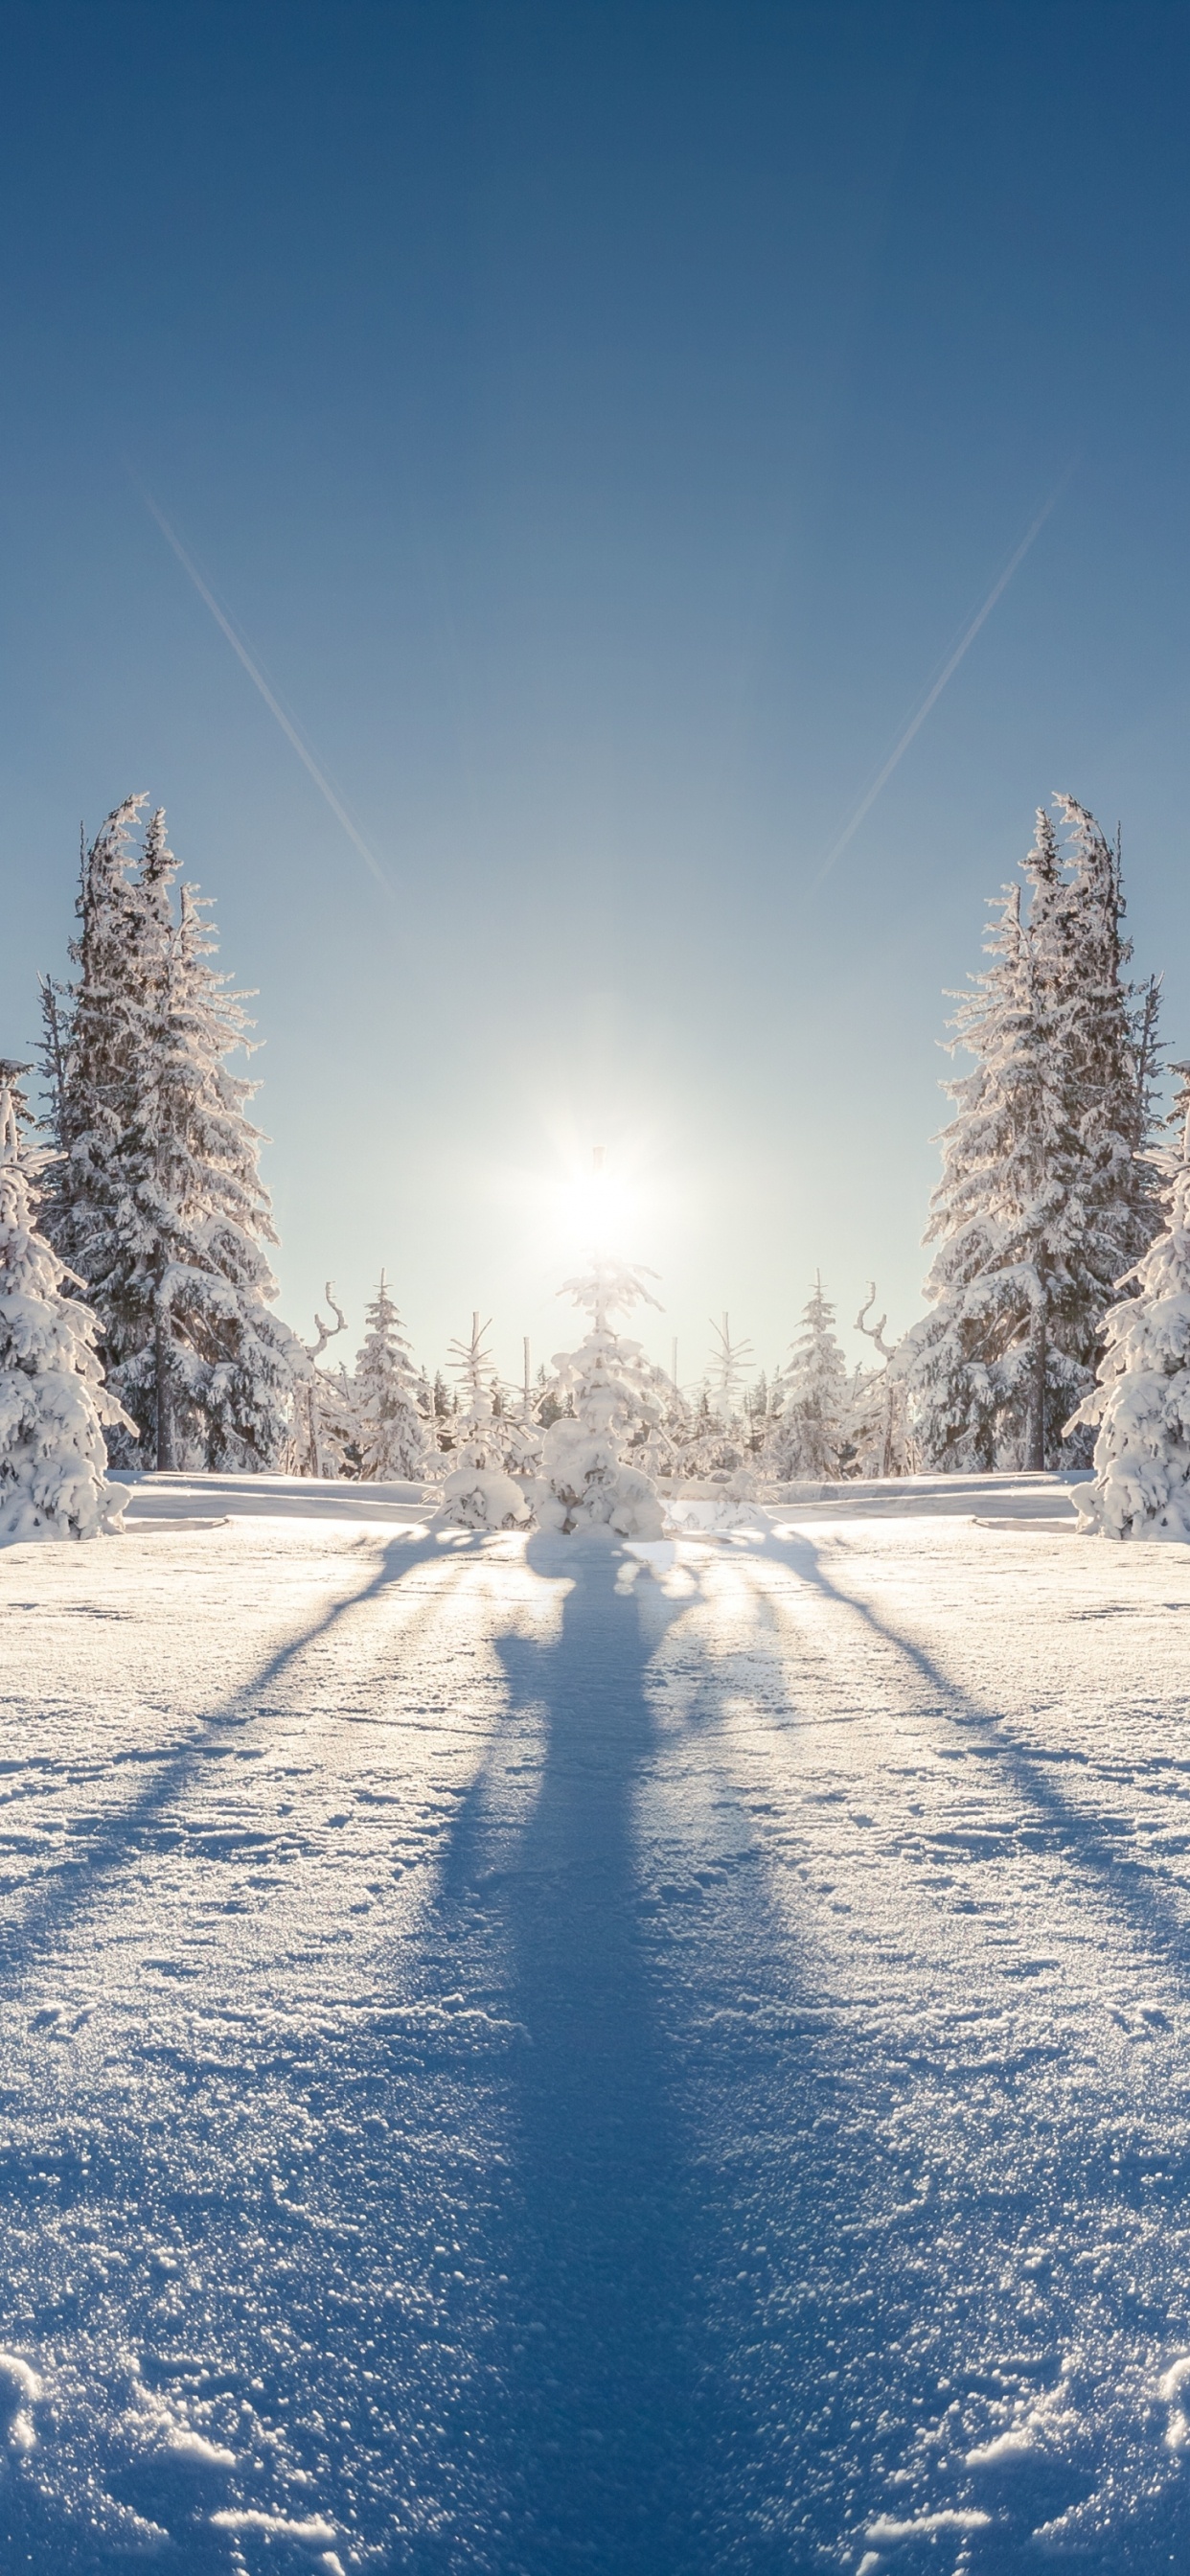 Snow Covered Trees Under Blue Sky During Daytime. Wallpaper in 1242x2688 Resolution